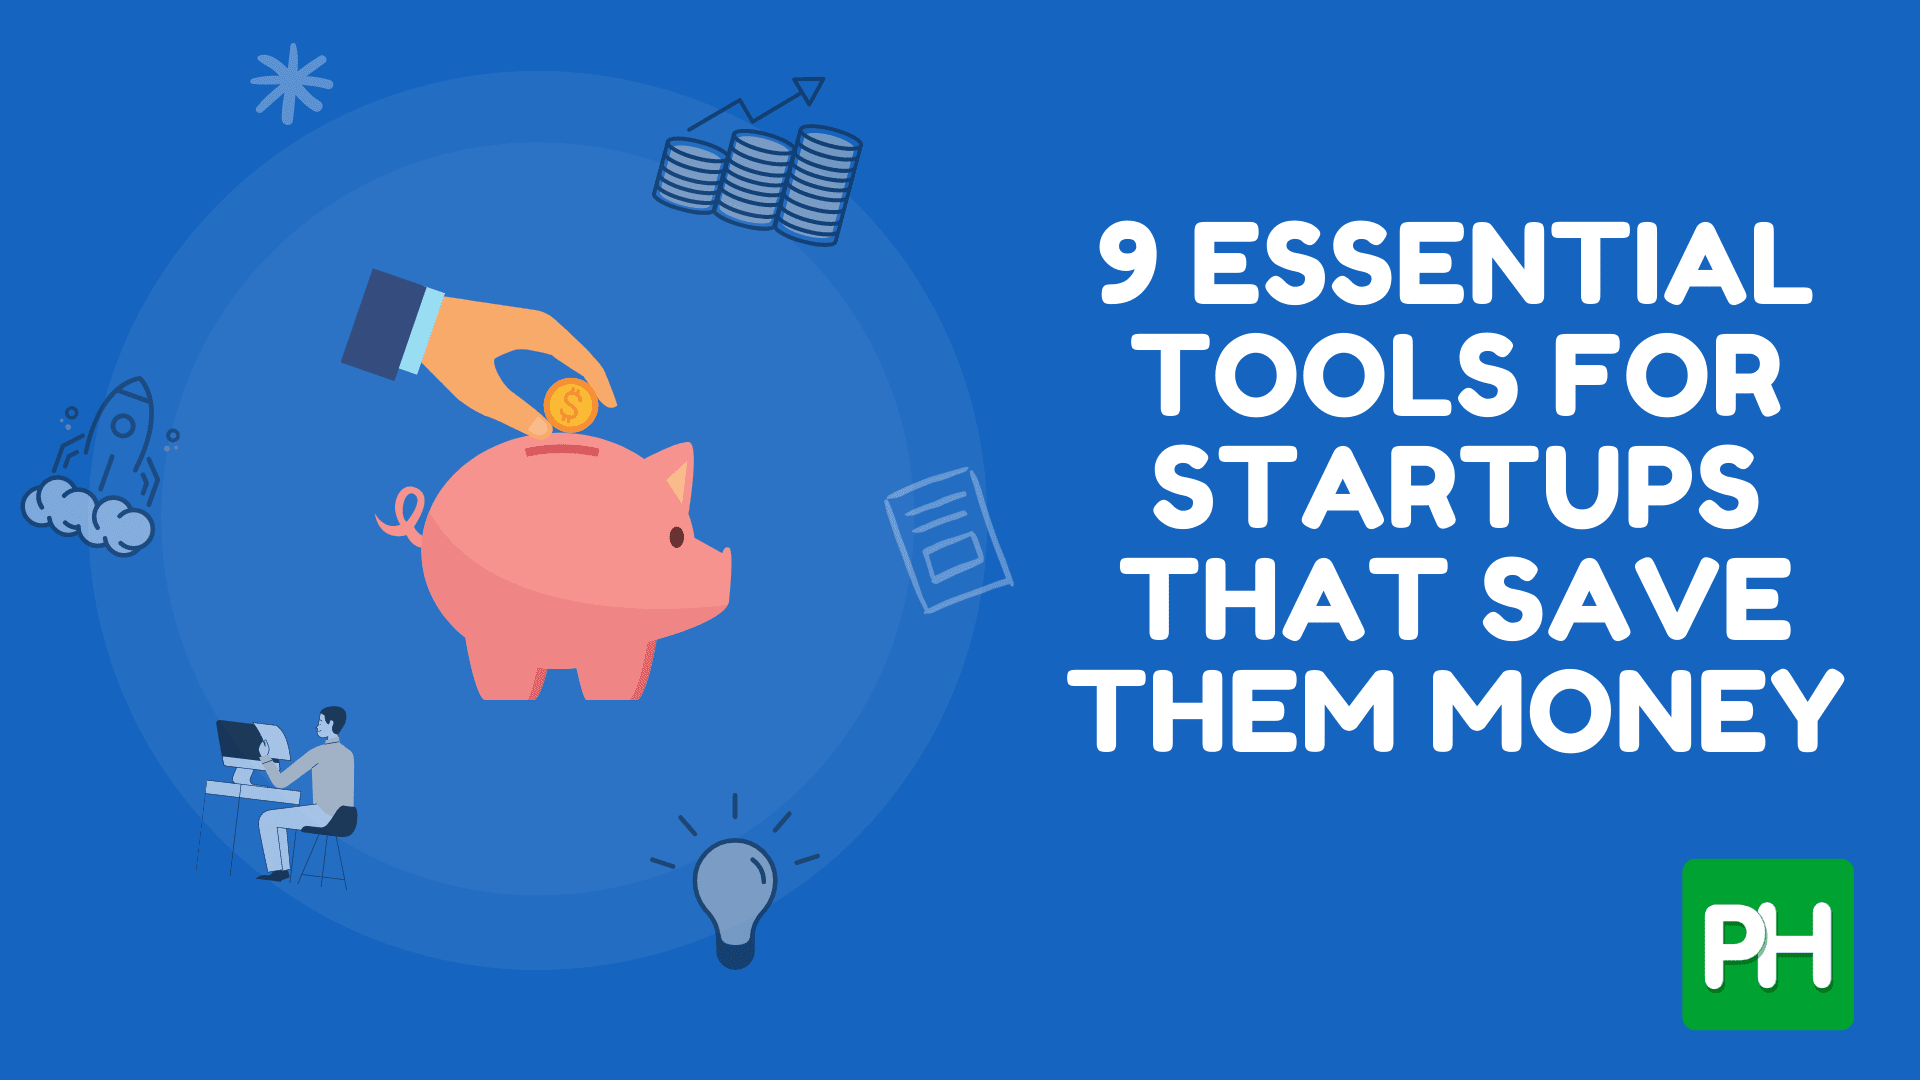 9 Paid Software Tools That Actually Save Money for Startups